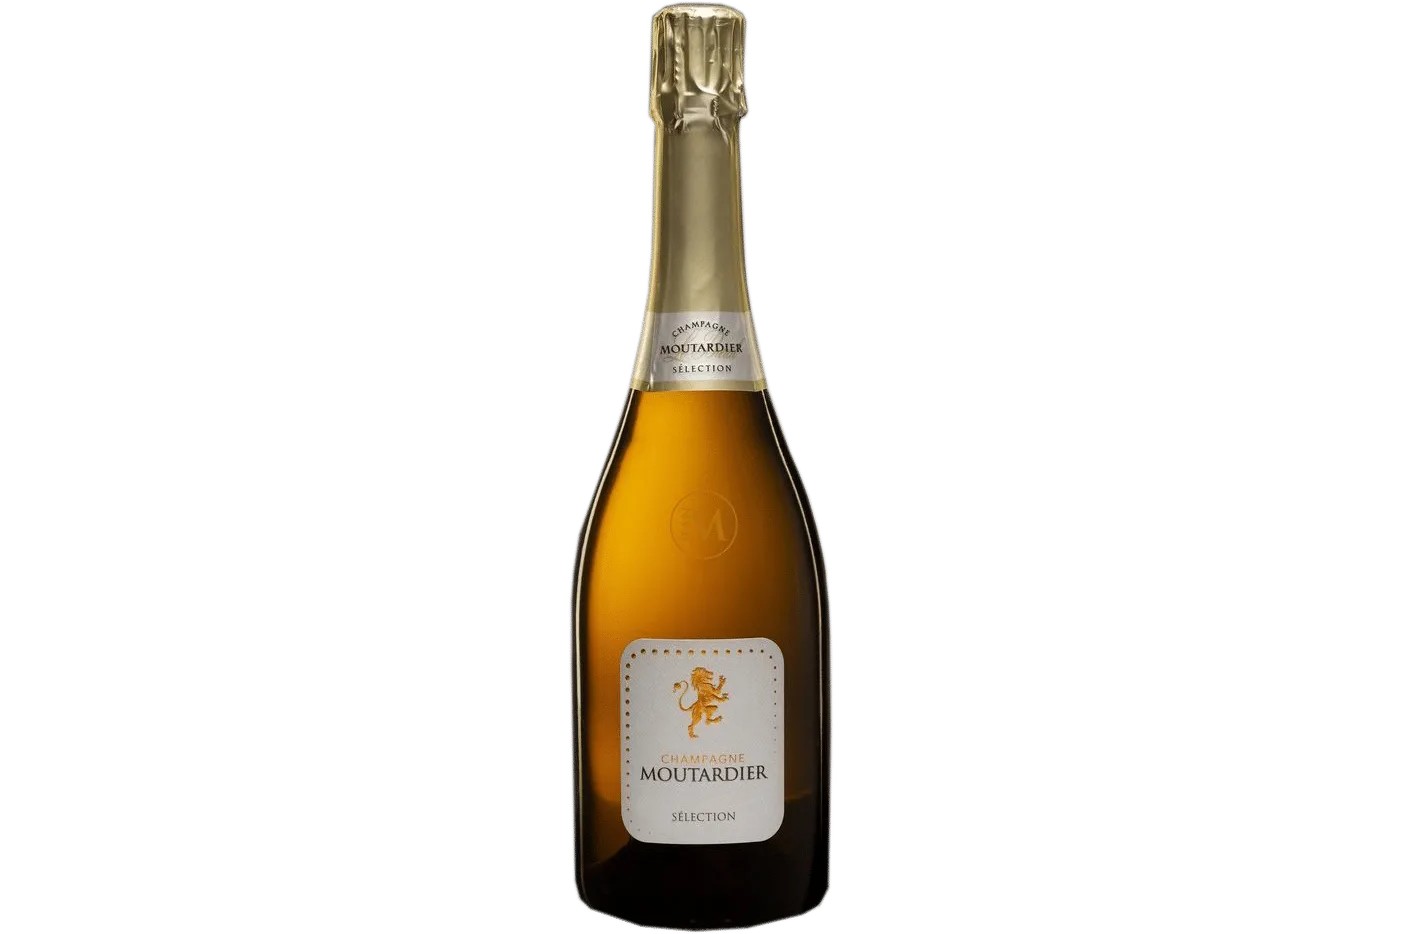 _Jean Moutardier Cuvee Sélection Brut Champagne